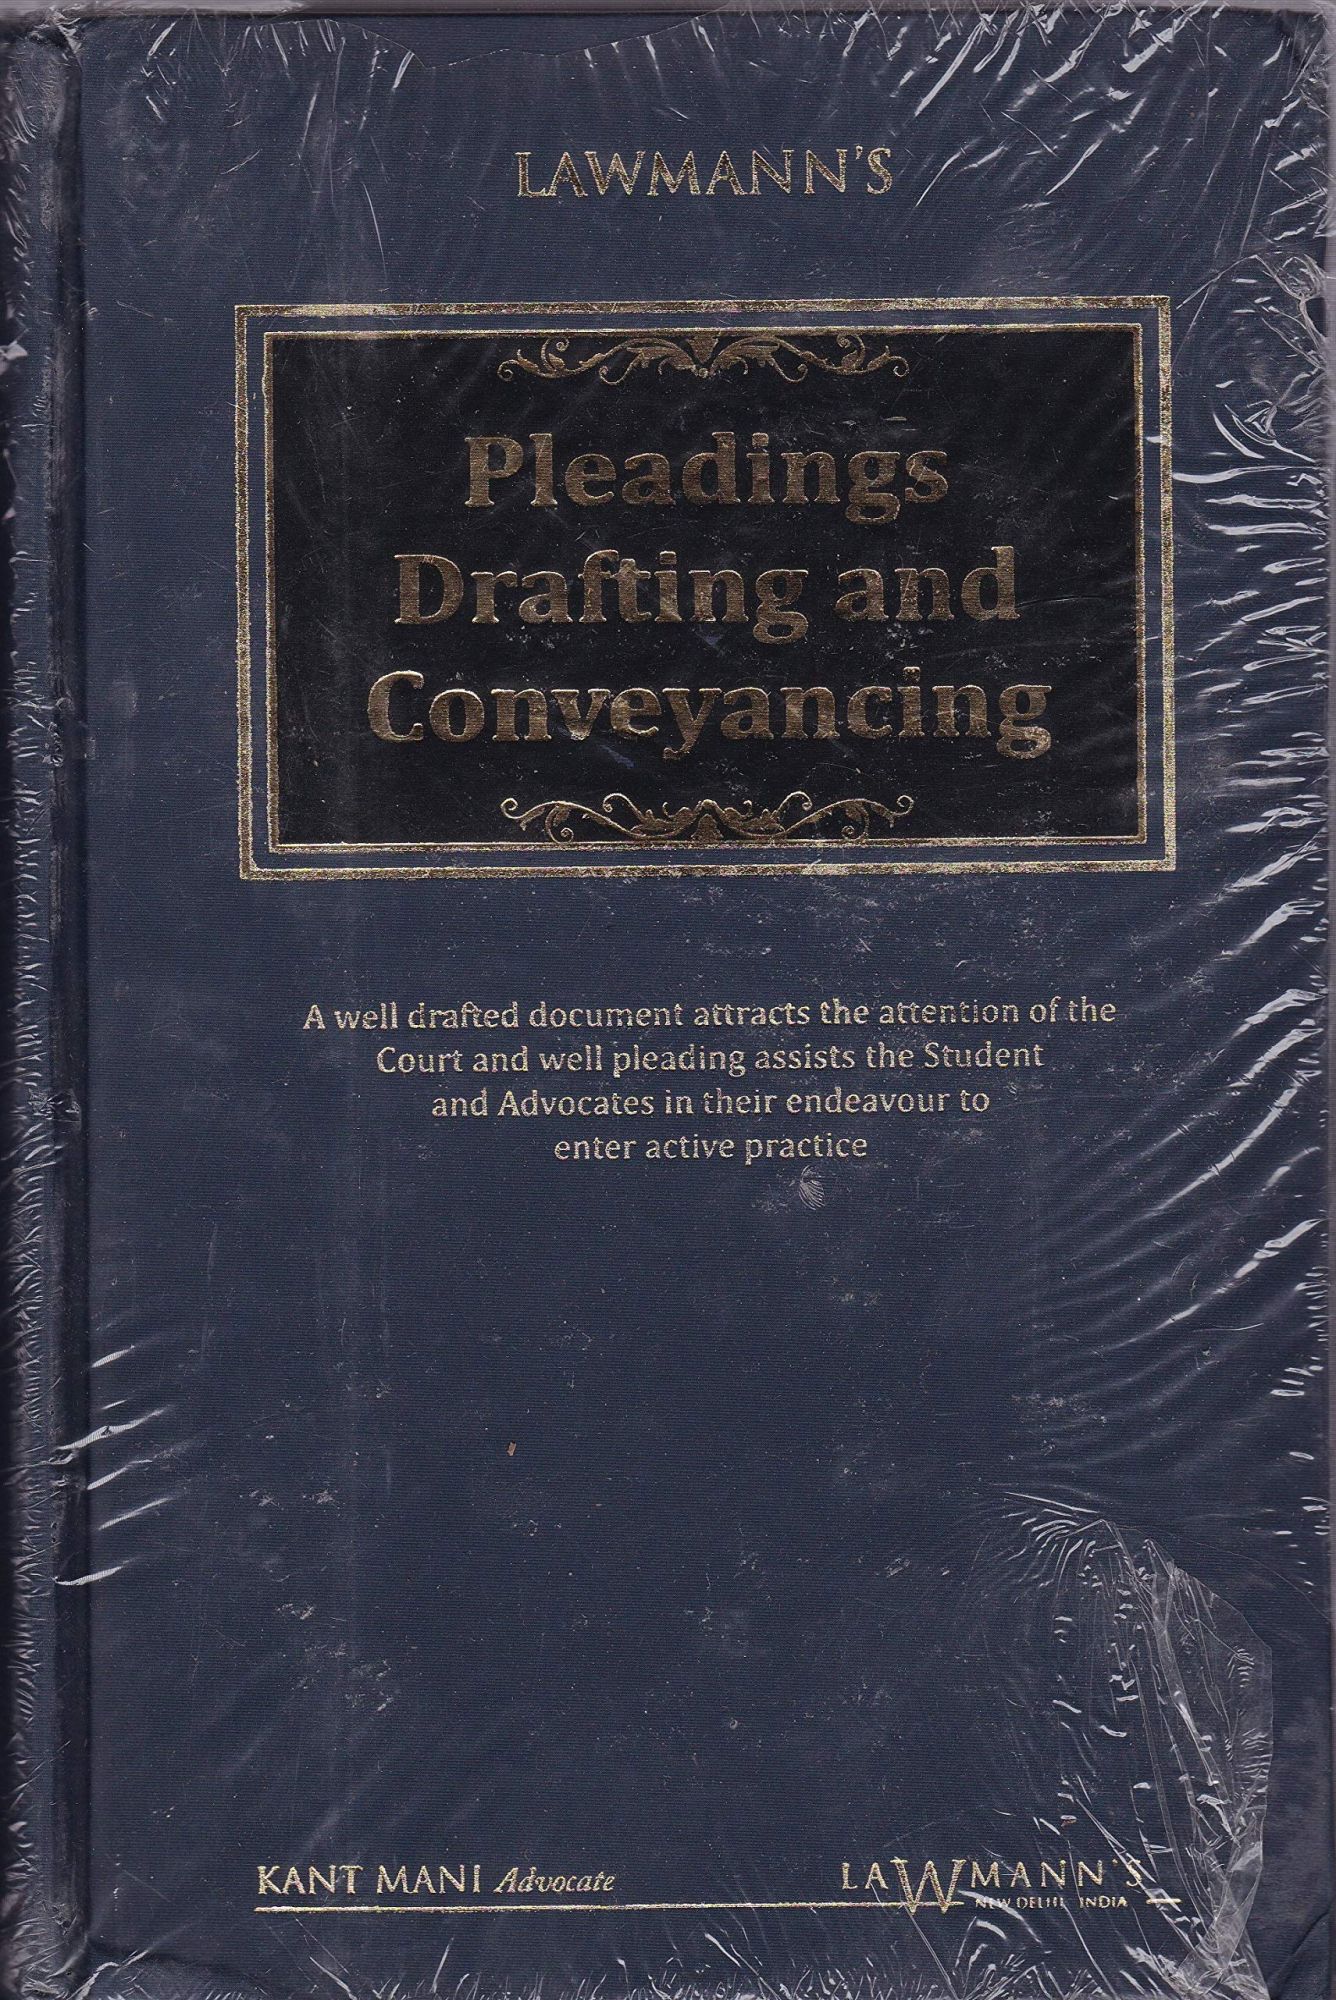 Pleading Drafting and Conveyancing by Lawmann's